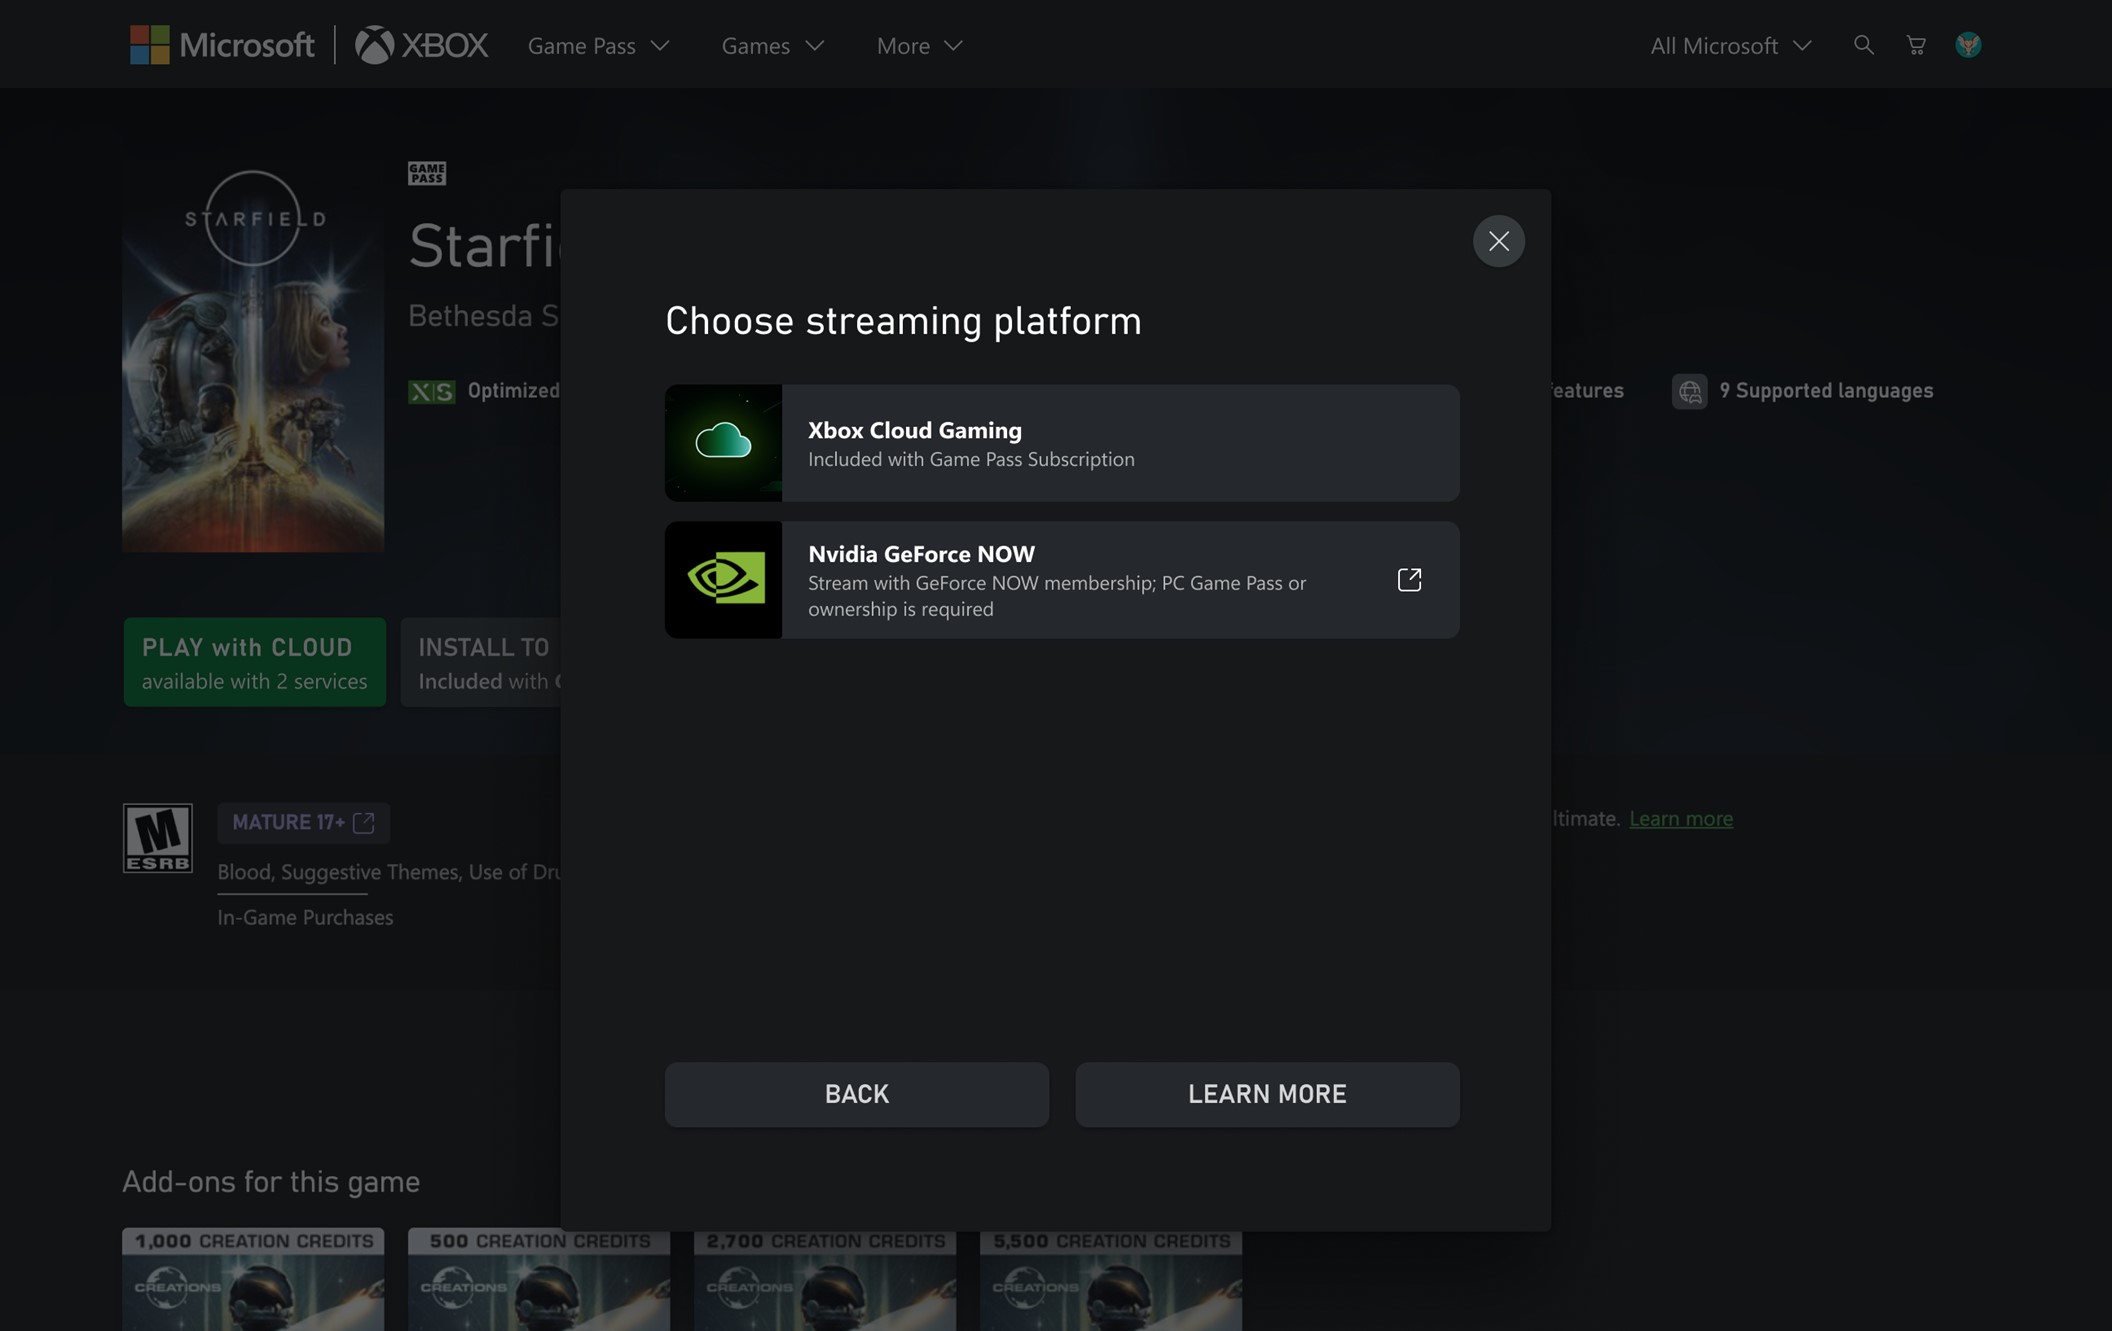 Screenshot of the new NVIDIA GeForce Now integration in the Xbox Store.